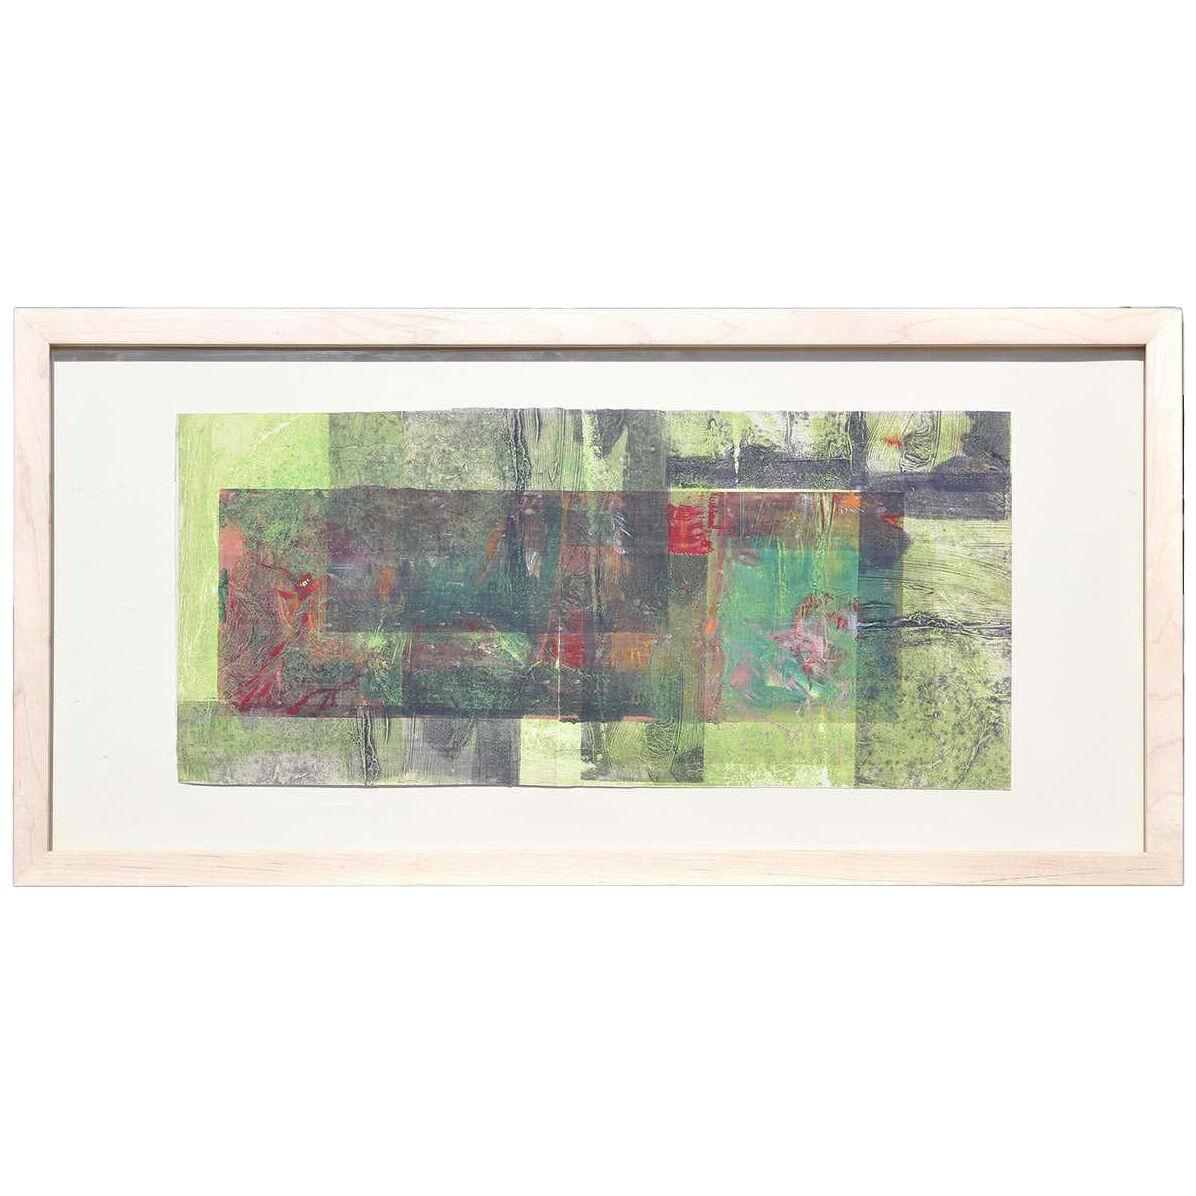 20th C "Untitled R43 0387" Abstract Mixed-Media Painting by R. Blasser, Framed